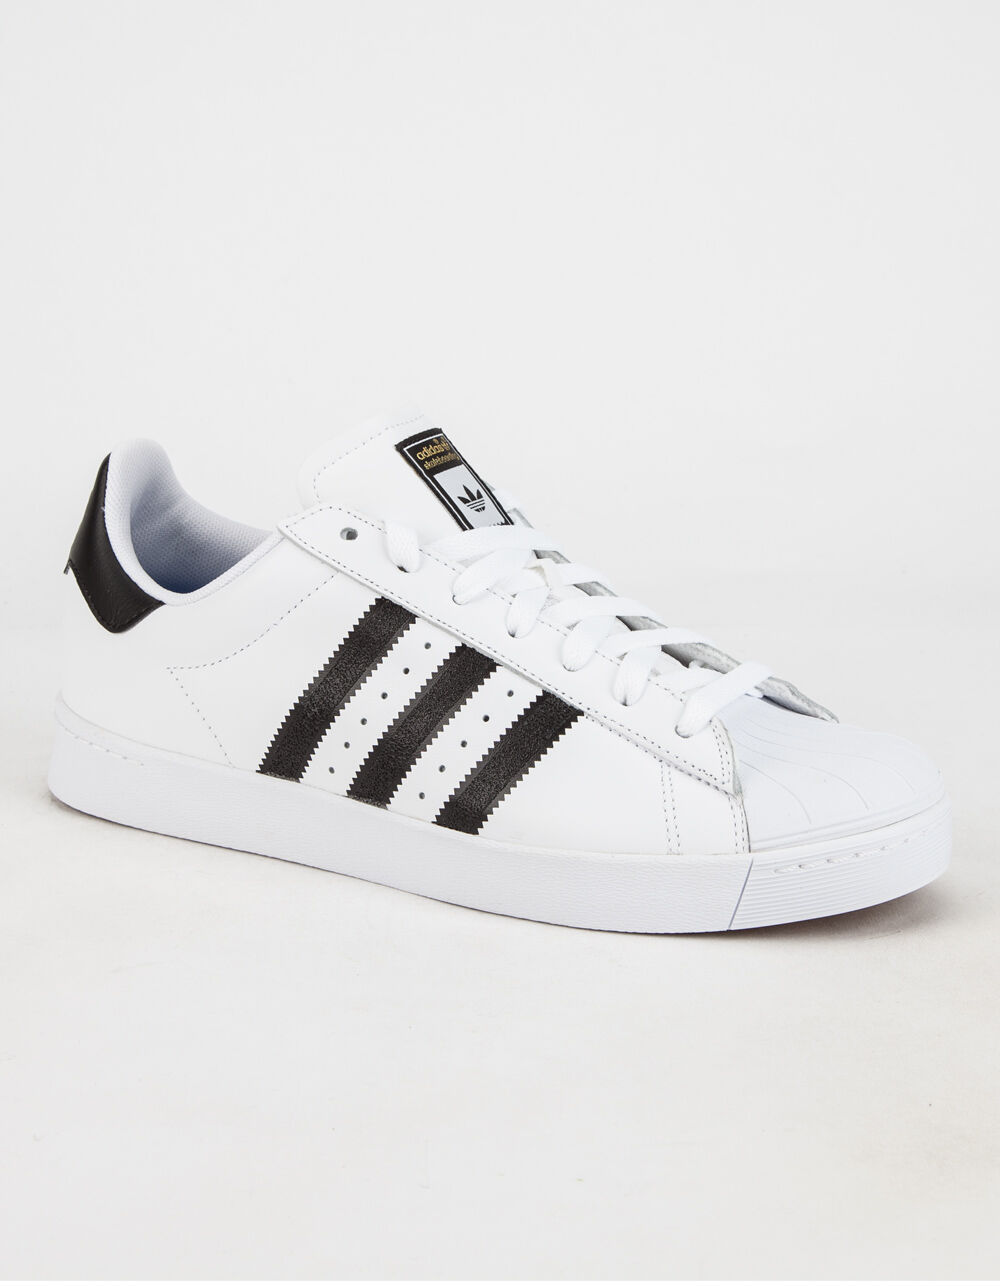 ADIDAS Superstar Vulc ADV Shoes image number 1